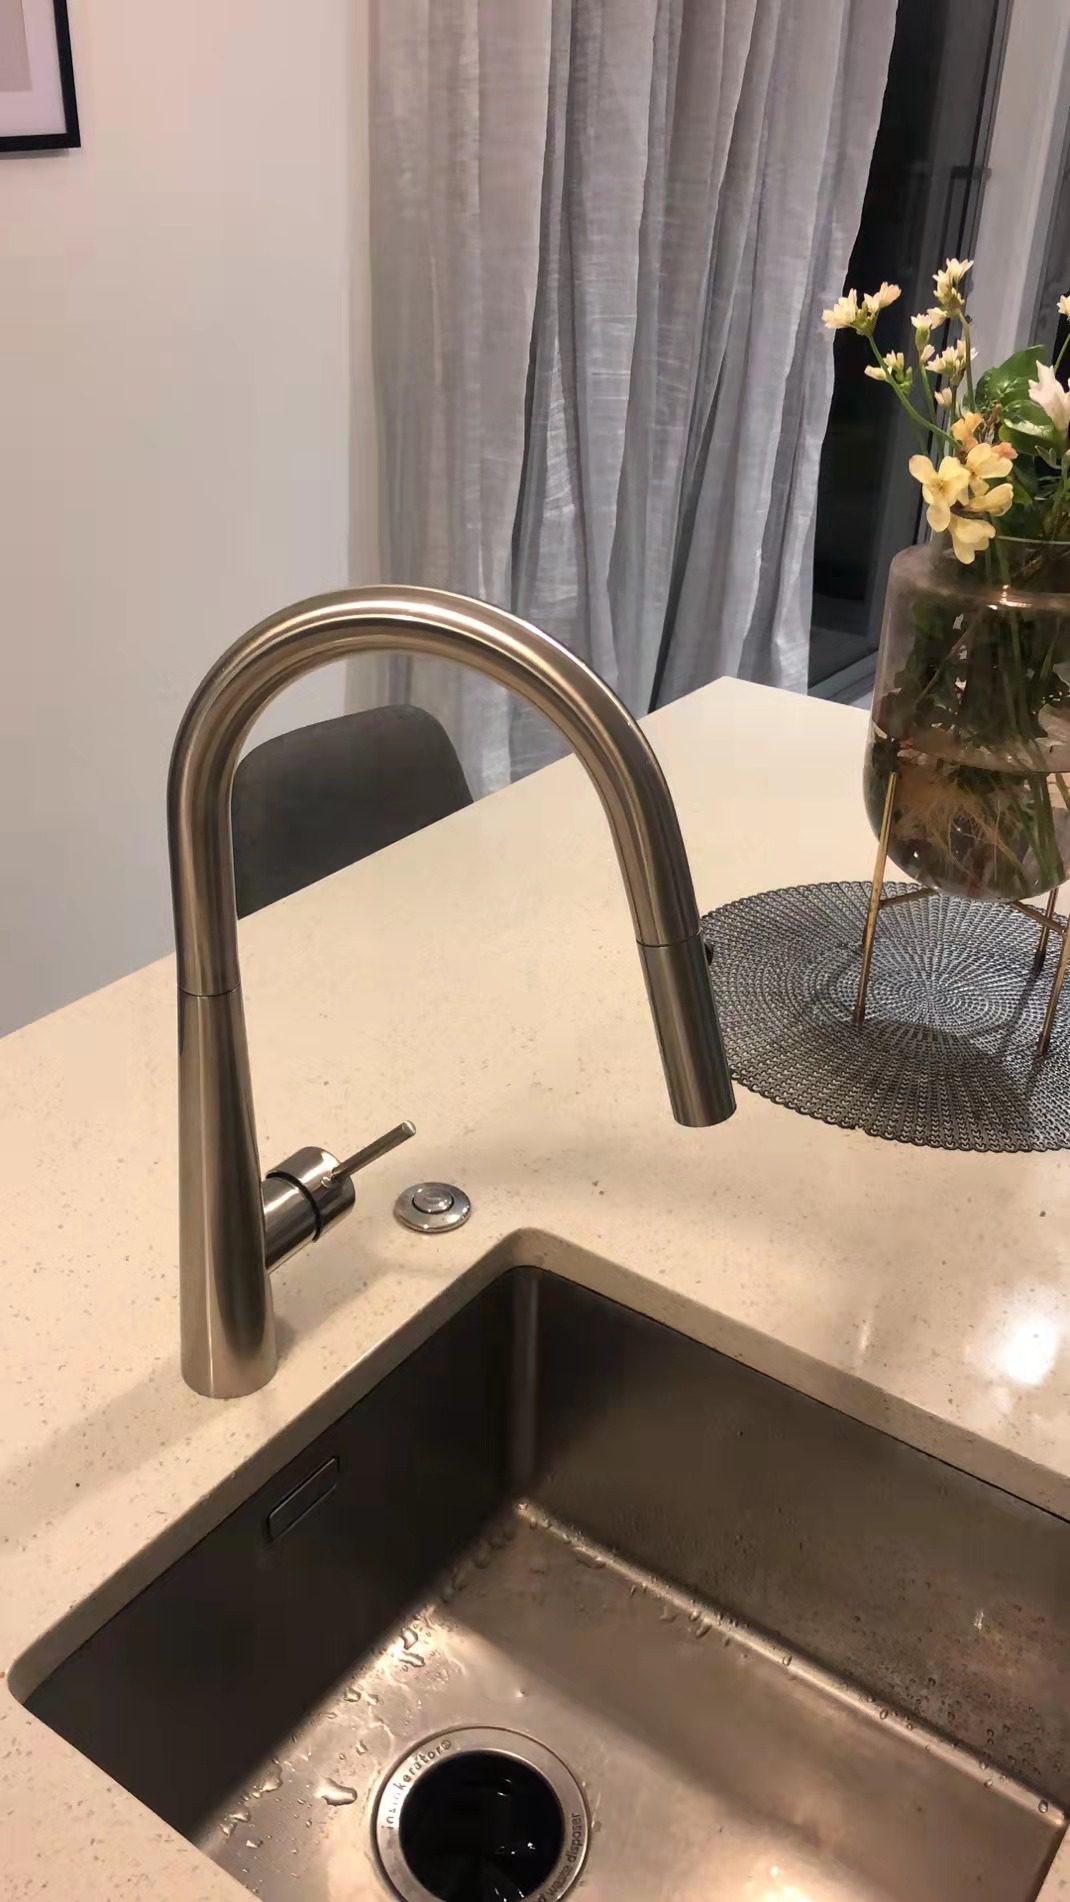 Brushed Nickle tap